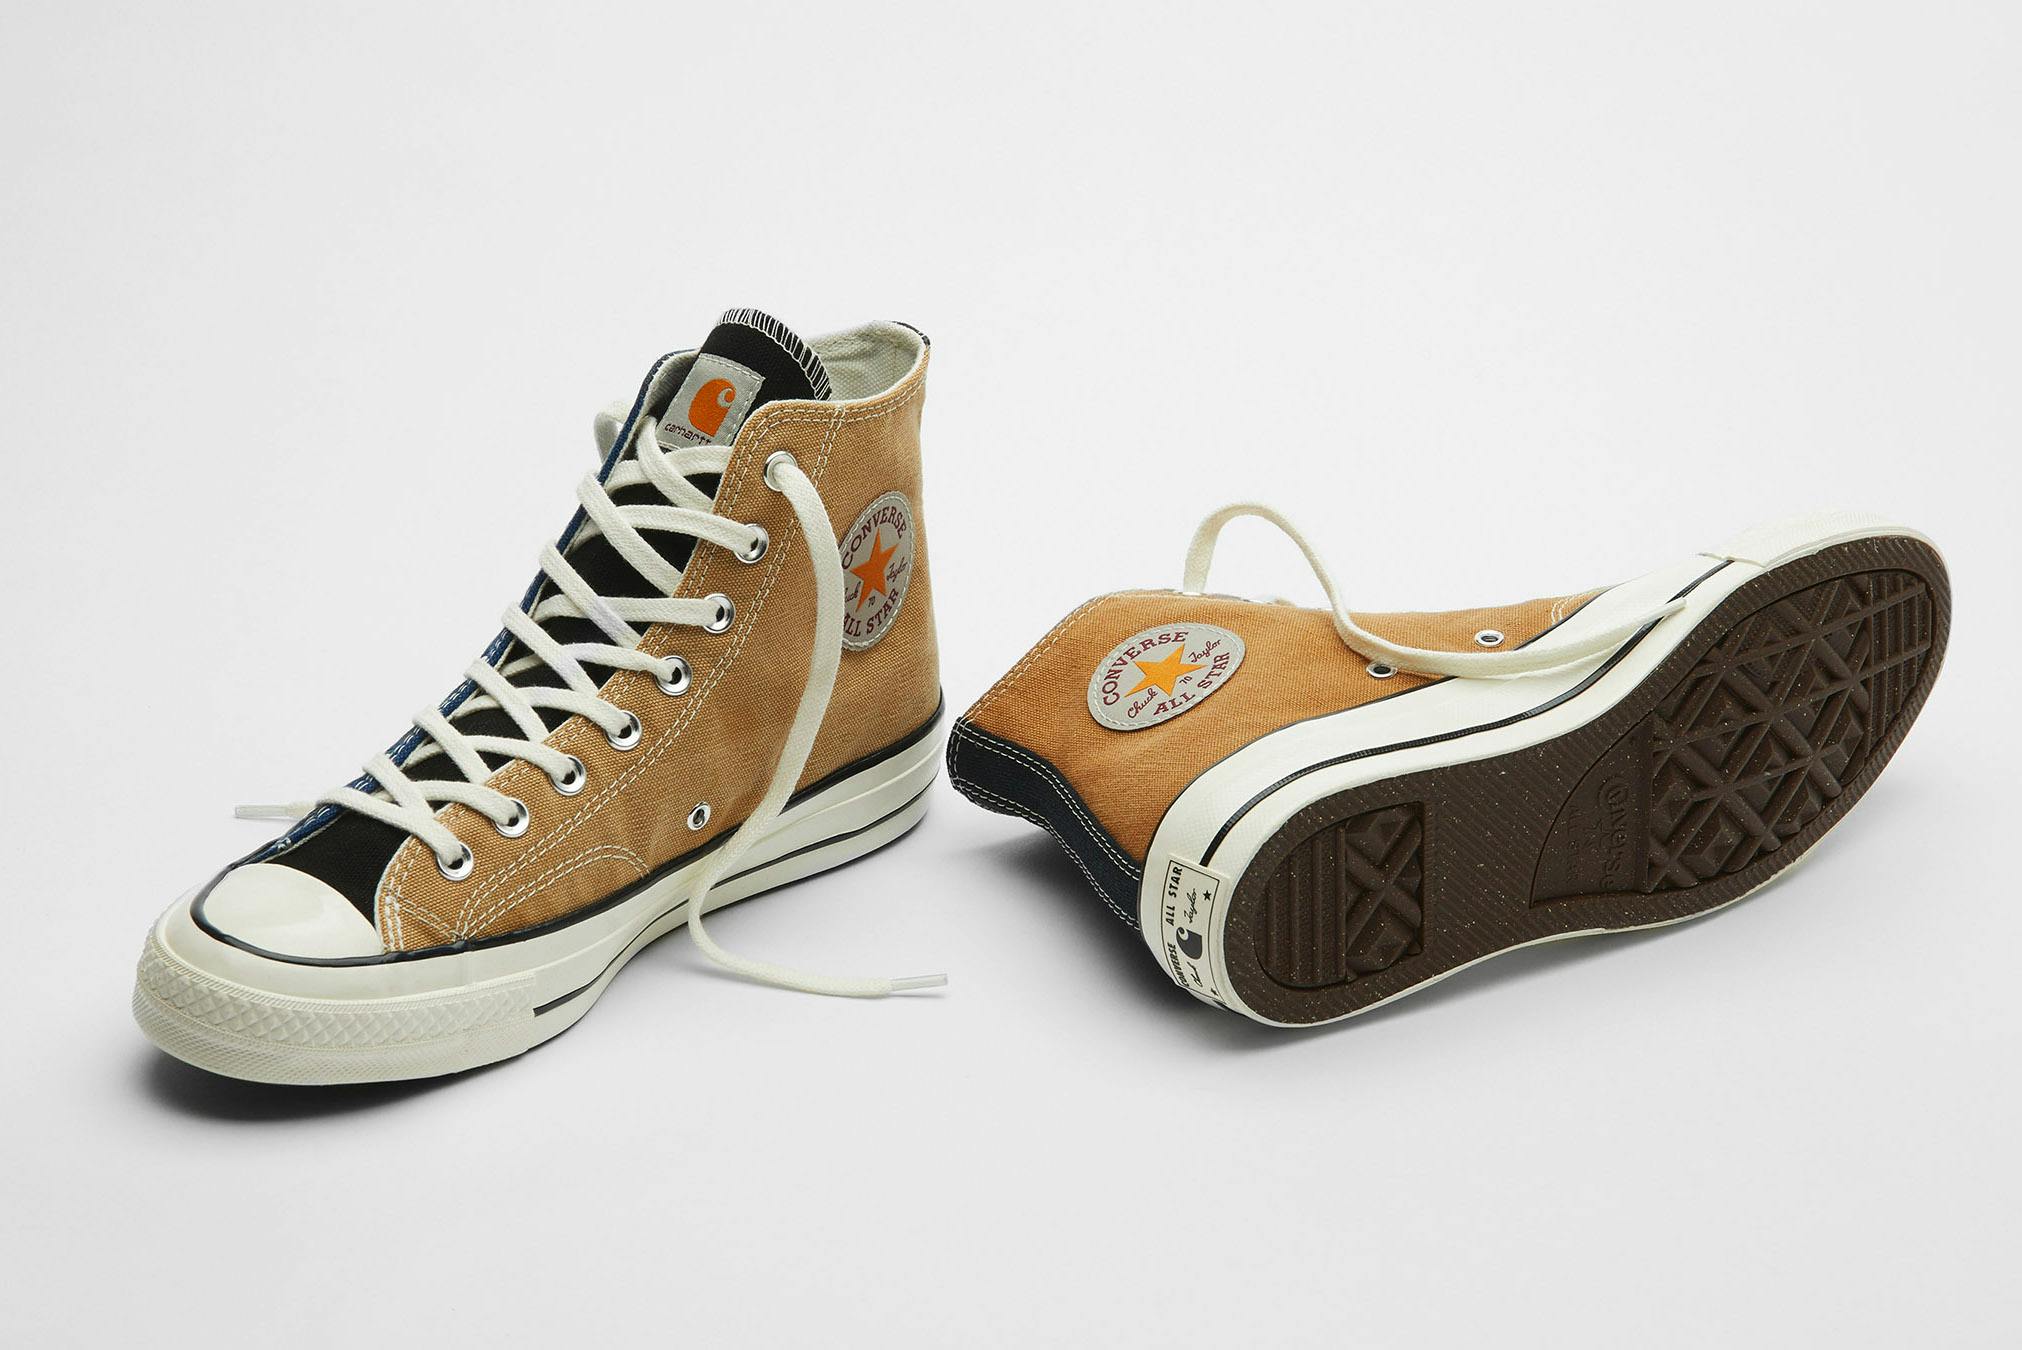 Converse x Carhartt WIP Renew Chuck Taylor 1970s Hi - Register Now on END.  (DK) Launches | END. (DK)